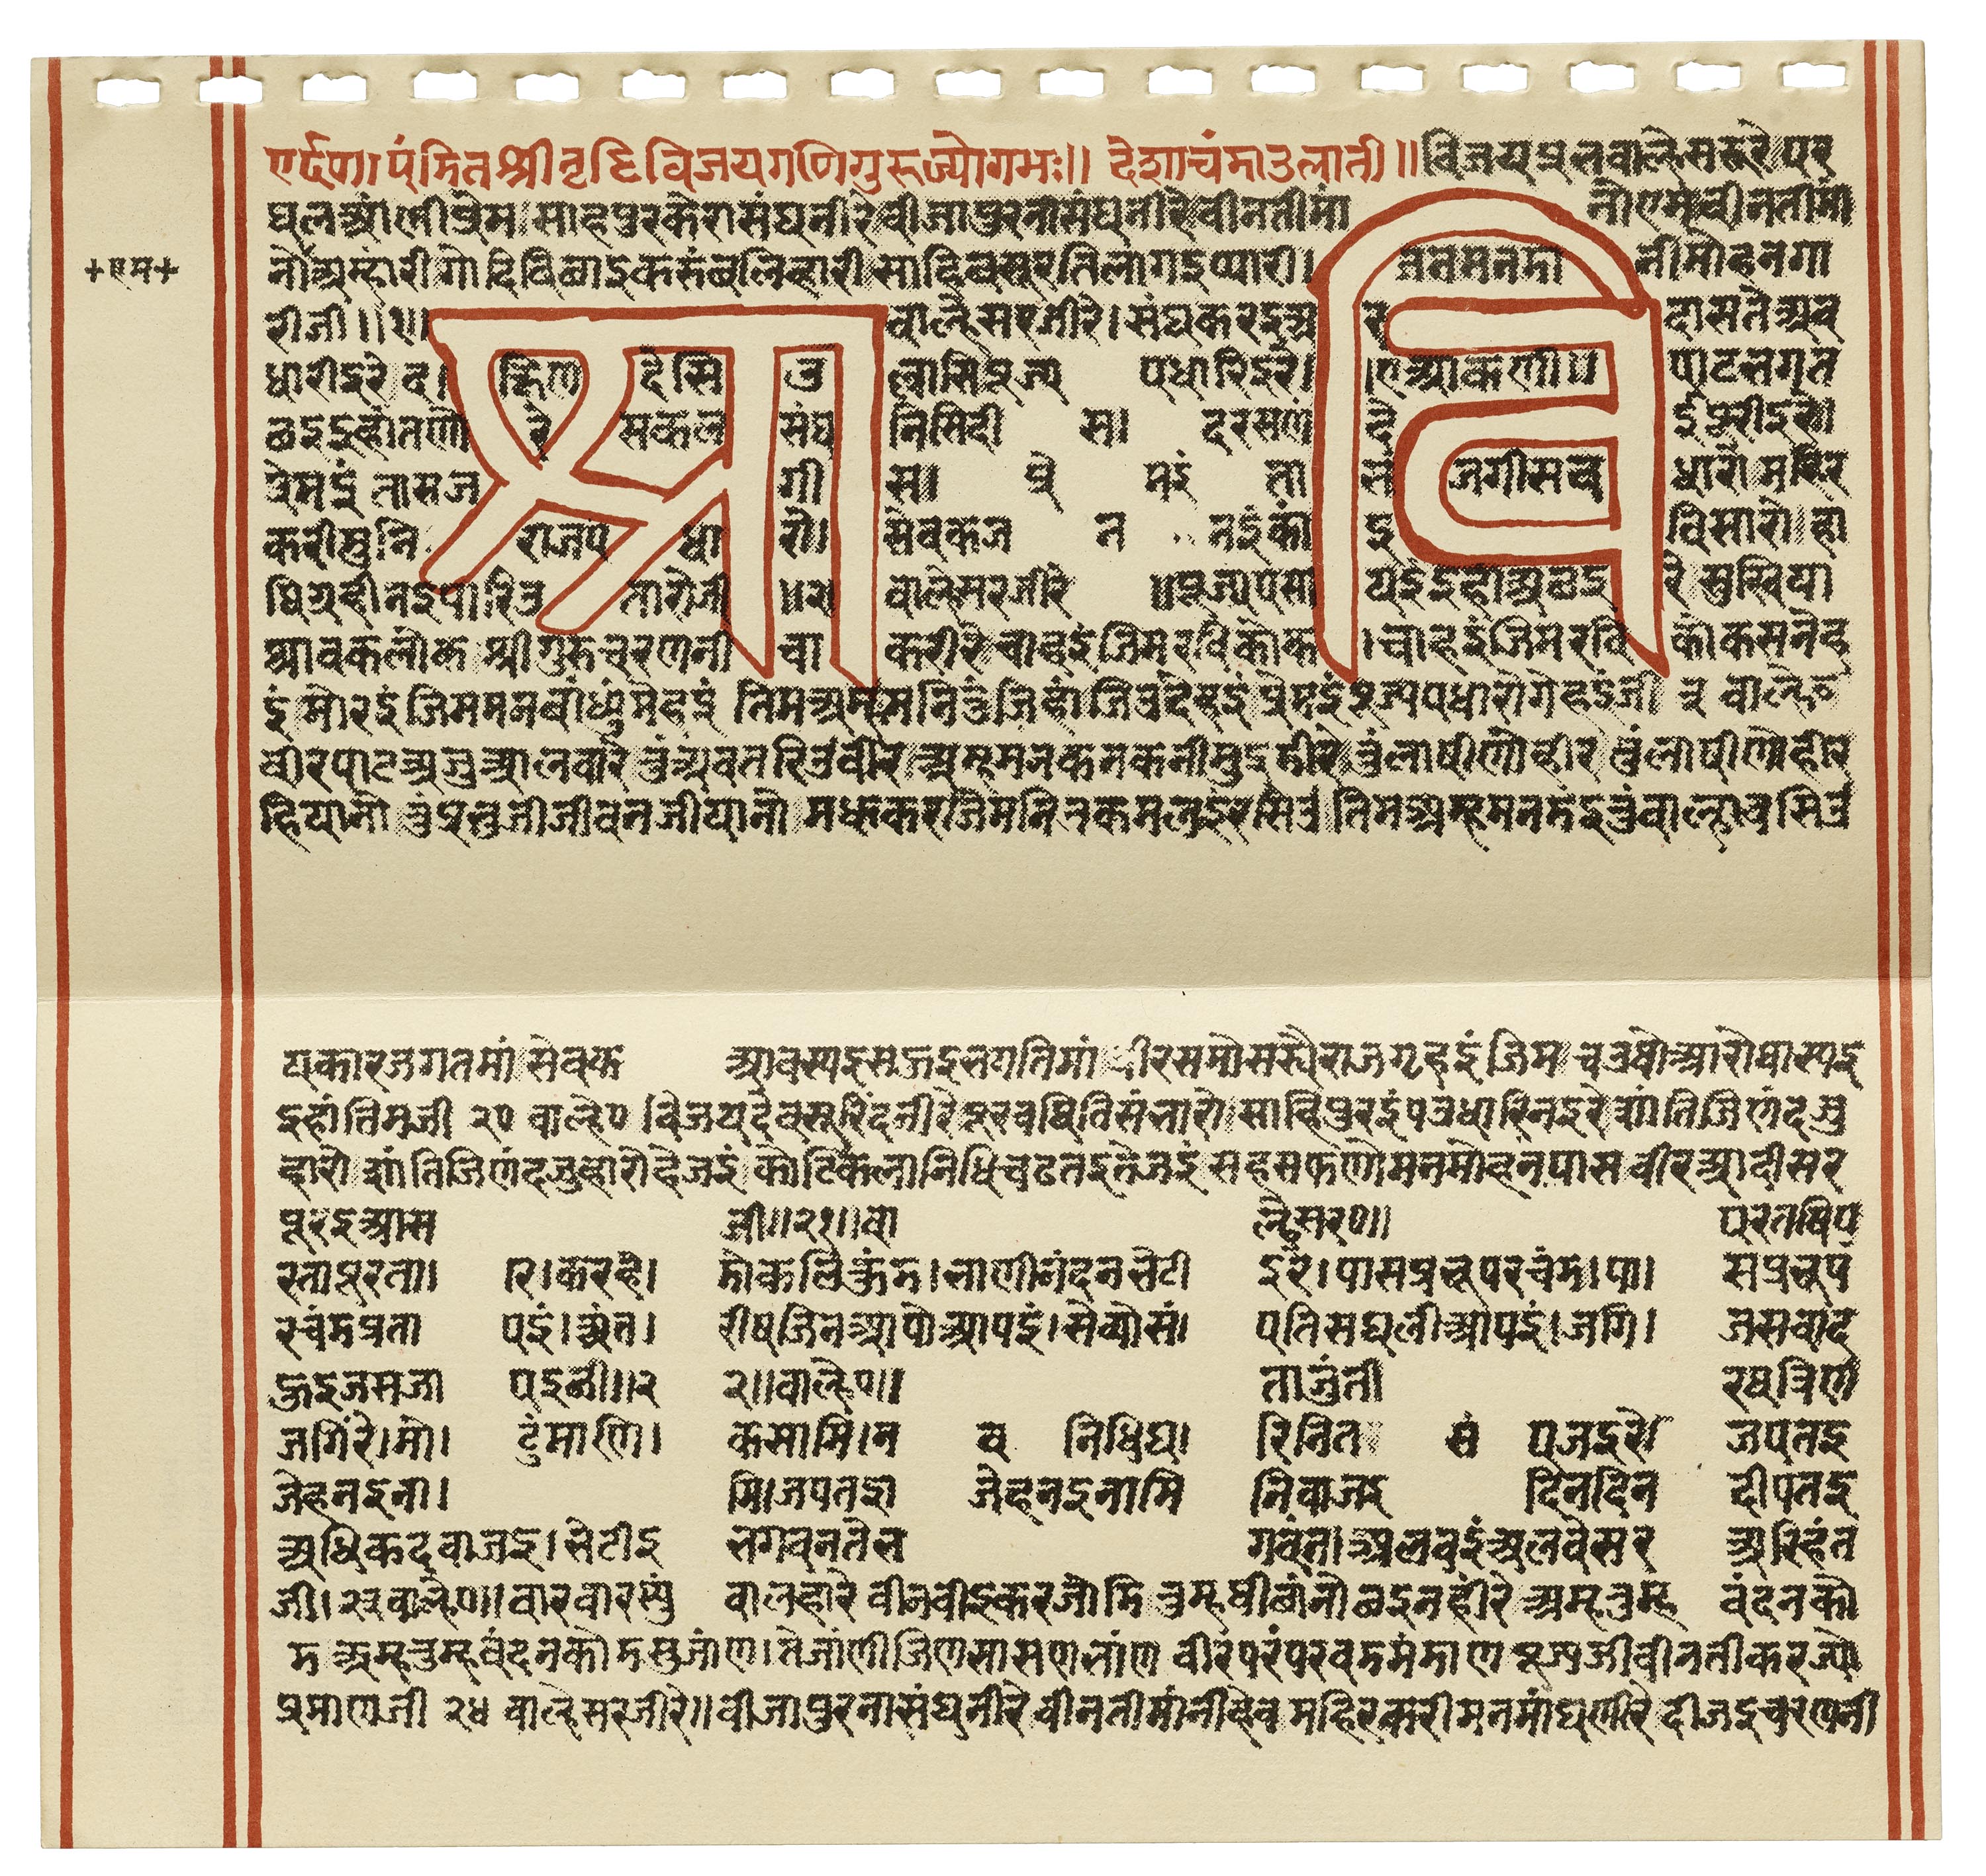 Folios from a Jain manuscript of 1657 A.D. Western India. An instance of the calligrapher's skill in placing the letters so that the blank spaces themselves form designs or letters. Ink on paper.